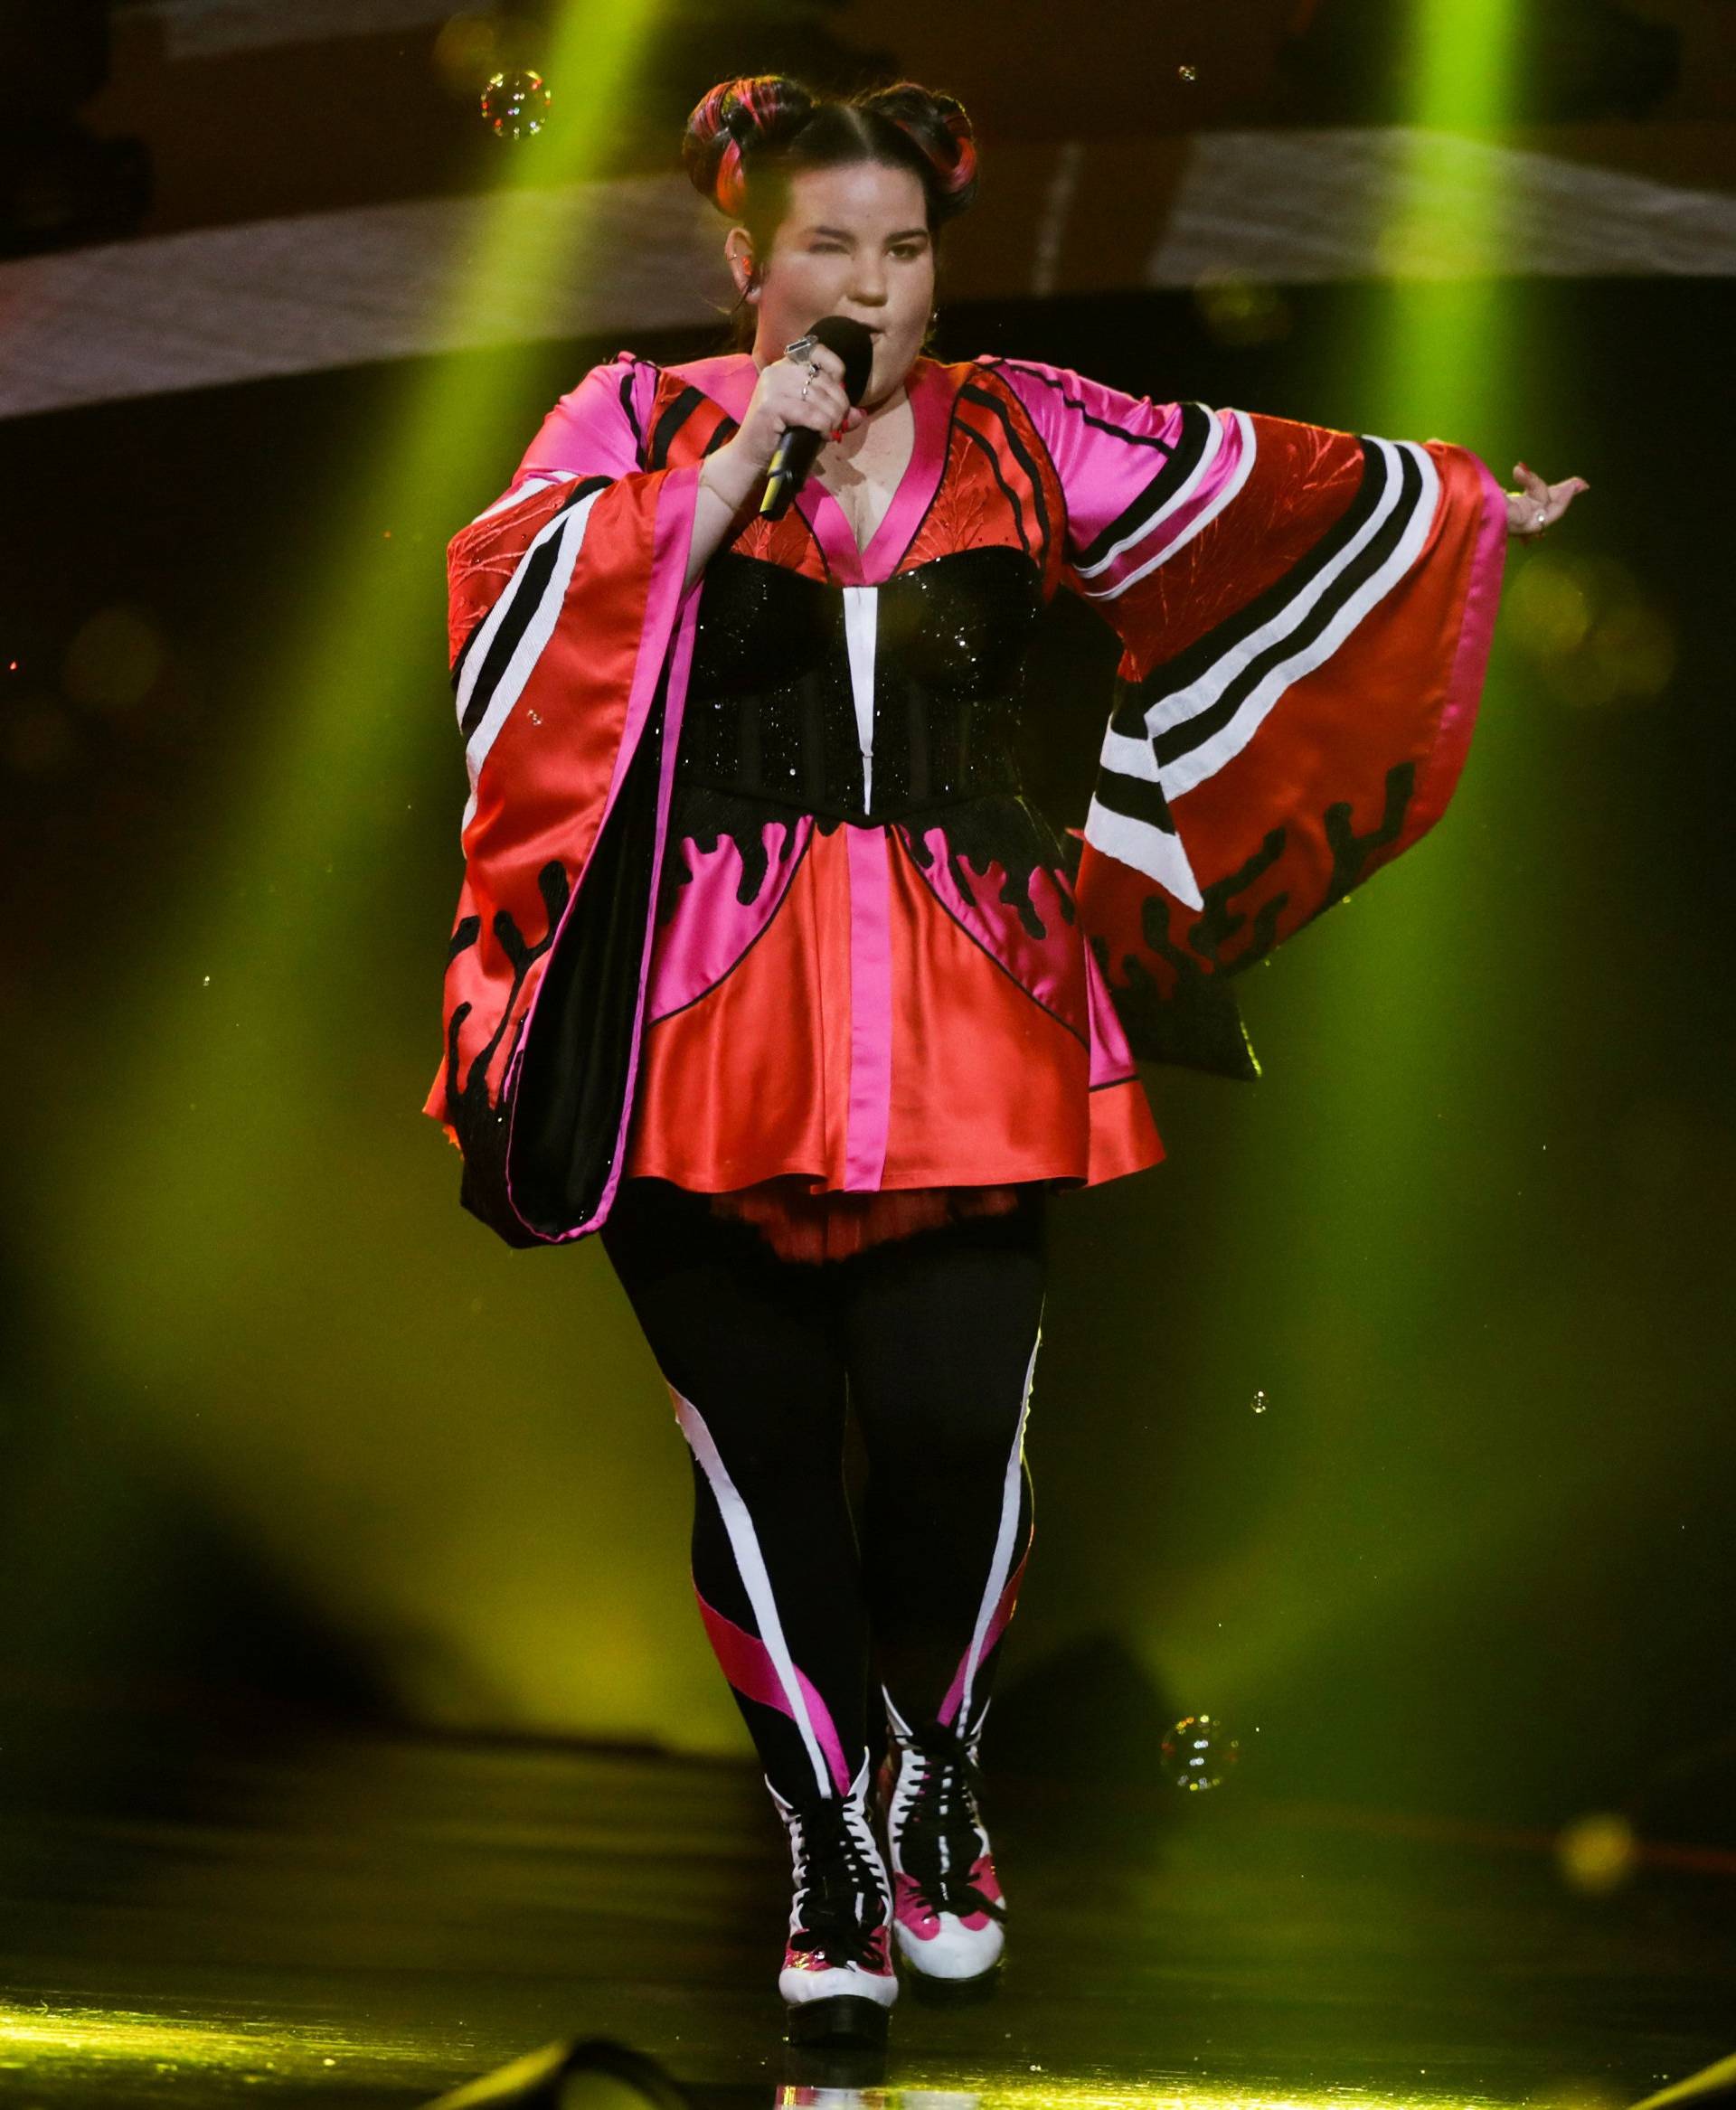 Israel's Netta performs "Toy" during the dress rehearsal for the Grand Final of the Eurovision Song Contest 2018 at the Alice Arena hall in Lisbon